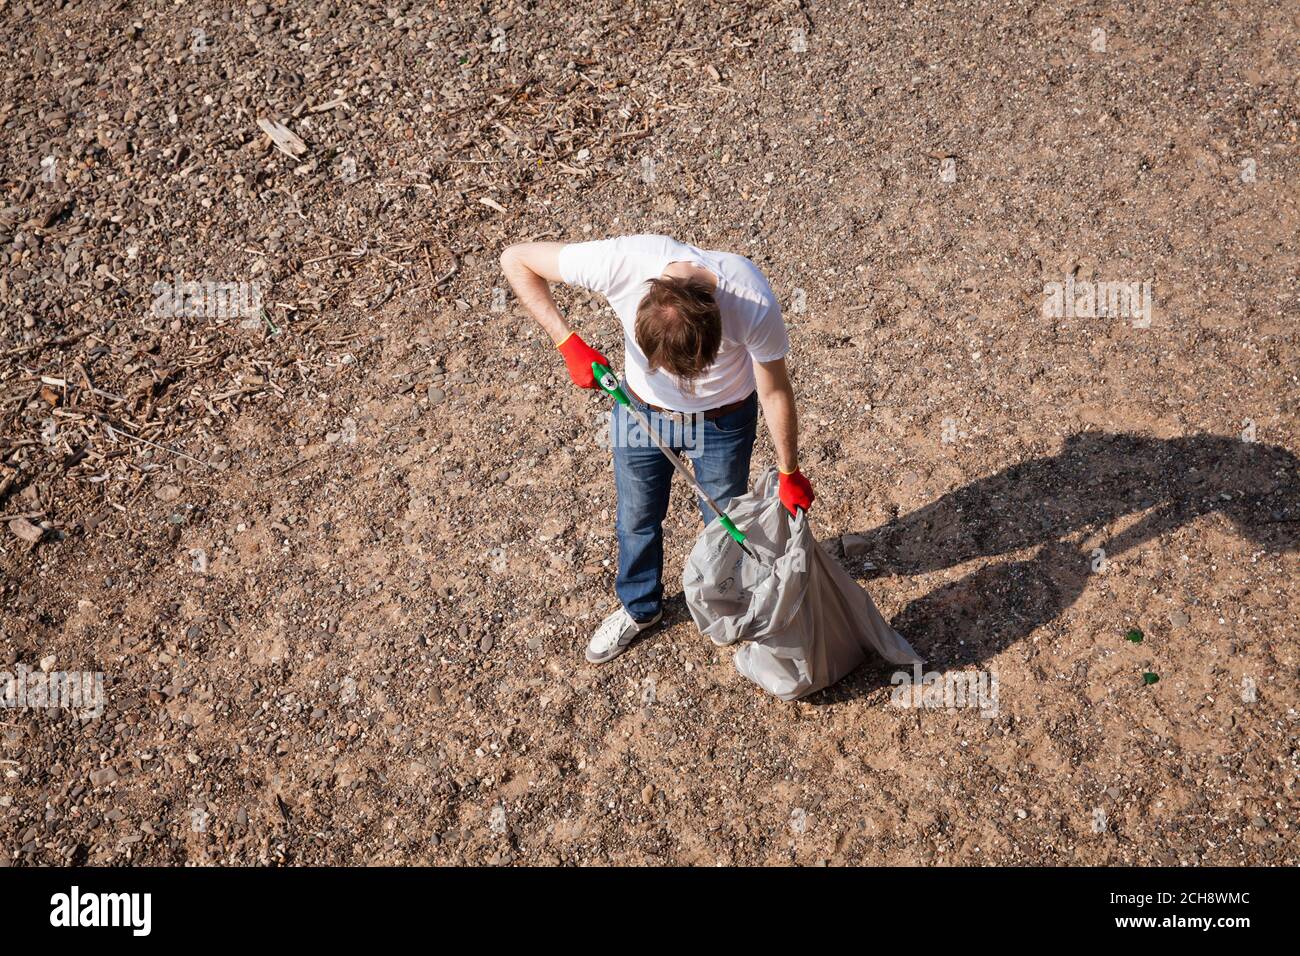 on the International Rhine CleanUp Day on September 12, 2020 volunteers collect garbage along the banks of the Rhine. In Cologne the association K.R.A Stock Photo